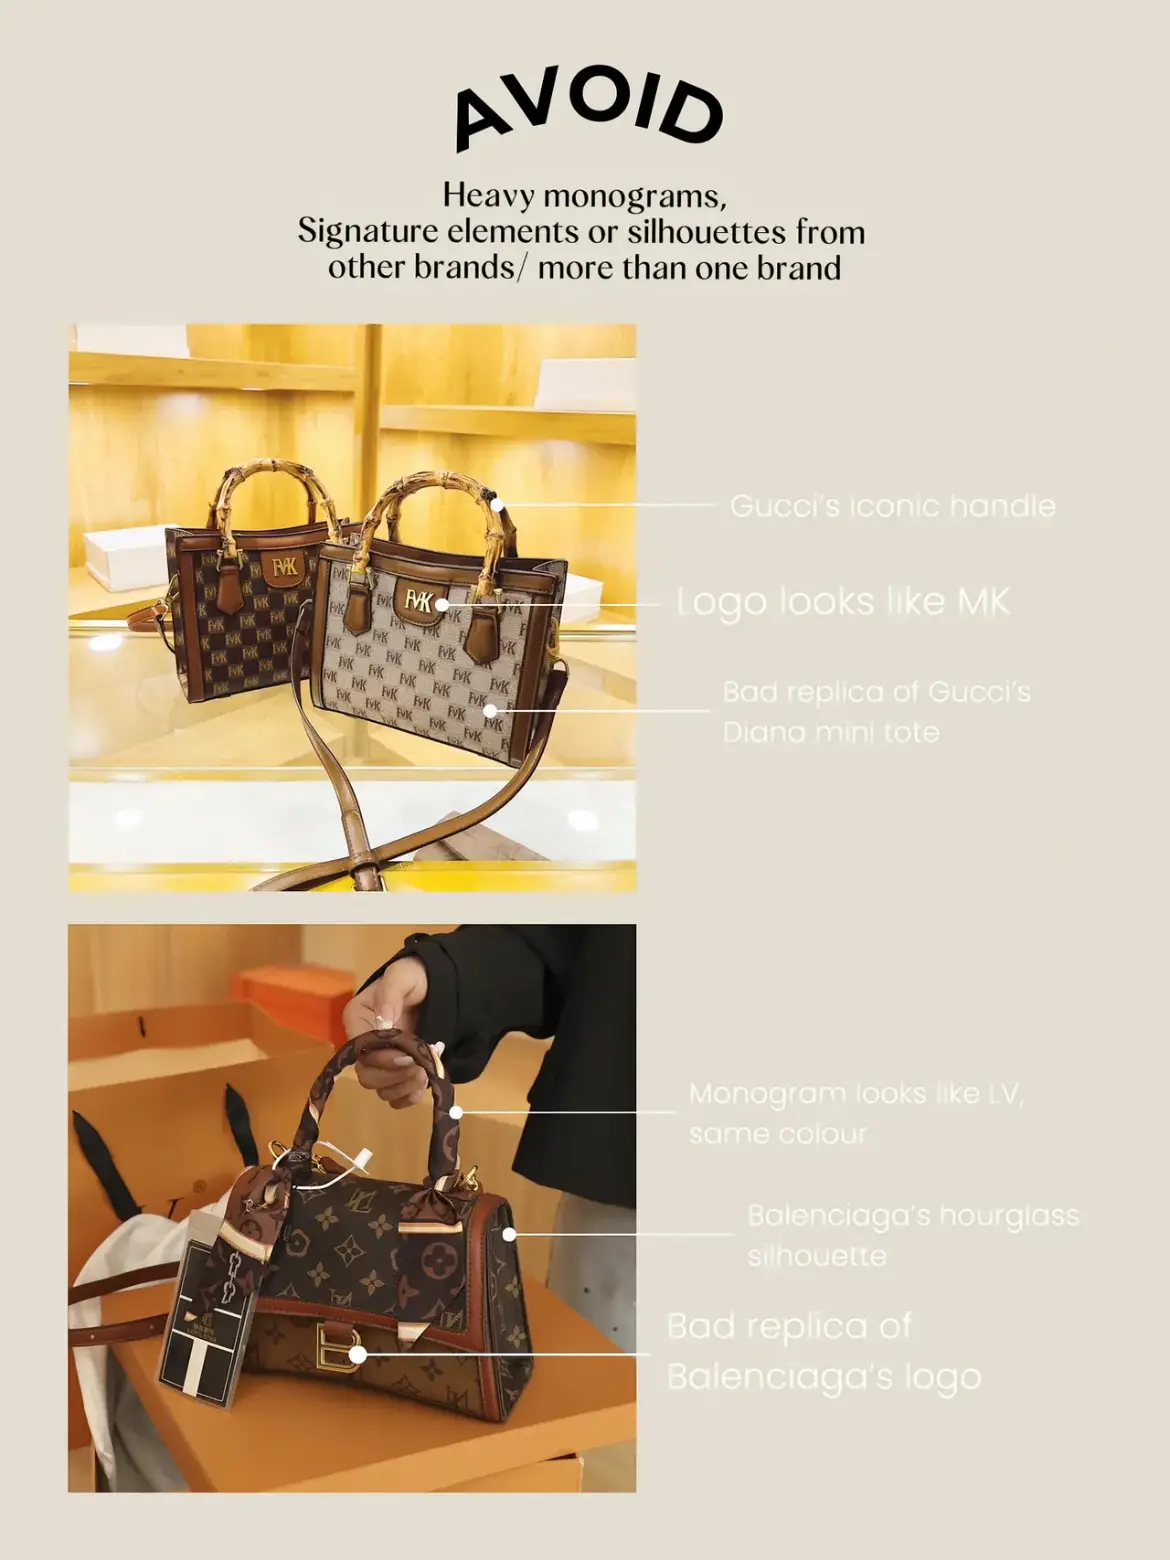 Why are Louis Vuitton replica bags considered to be of poor